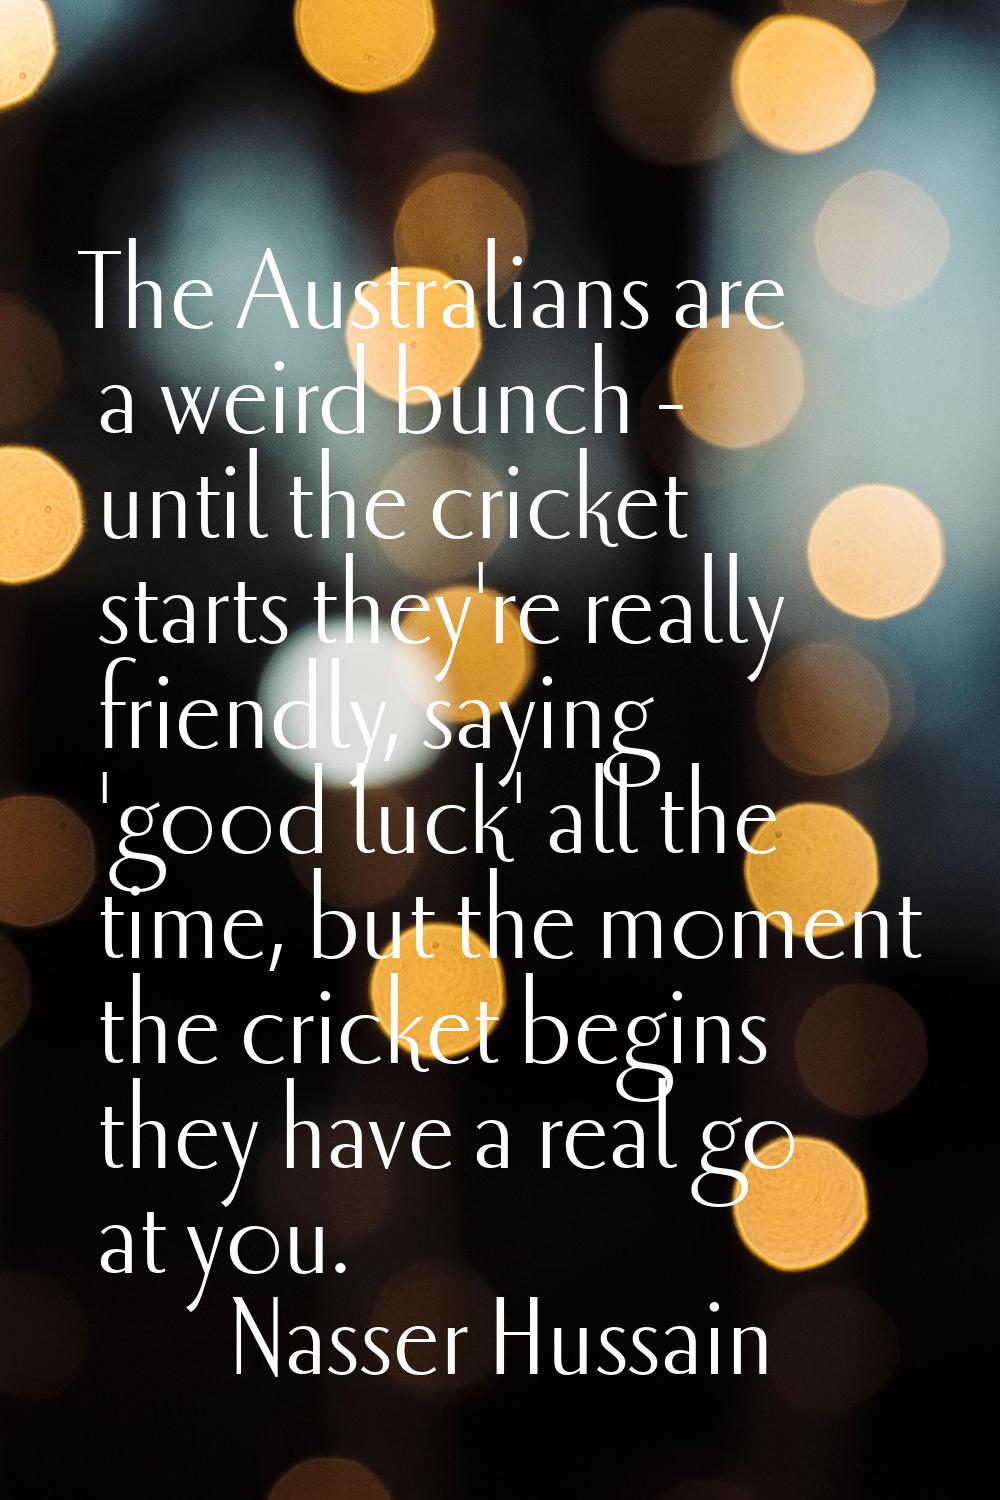 The Australians are a weird bunch - until the cricket starts they're really friendly, saying 'good 